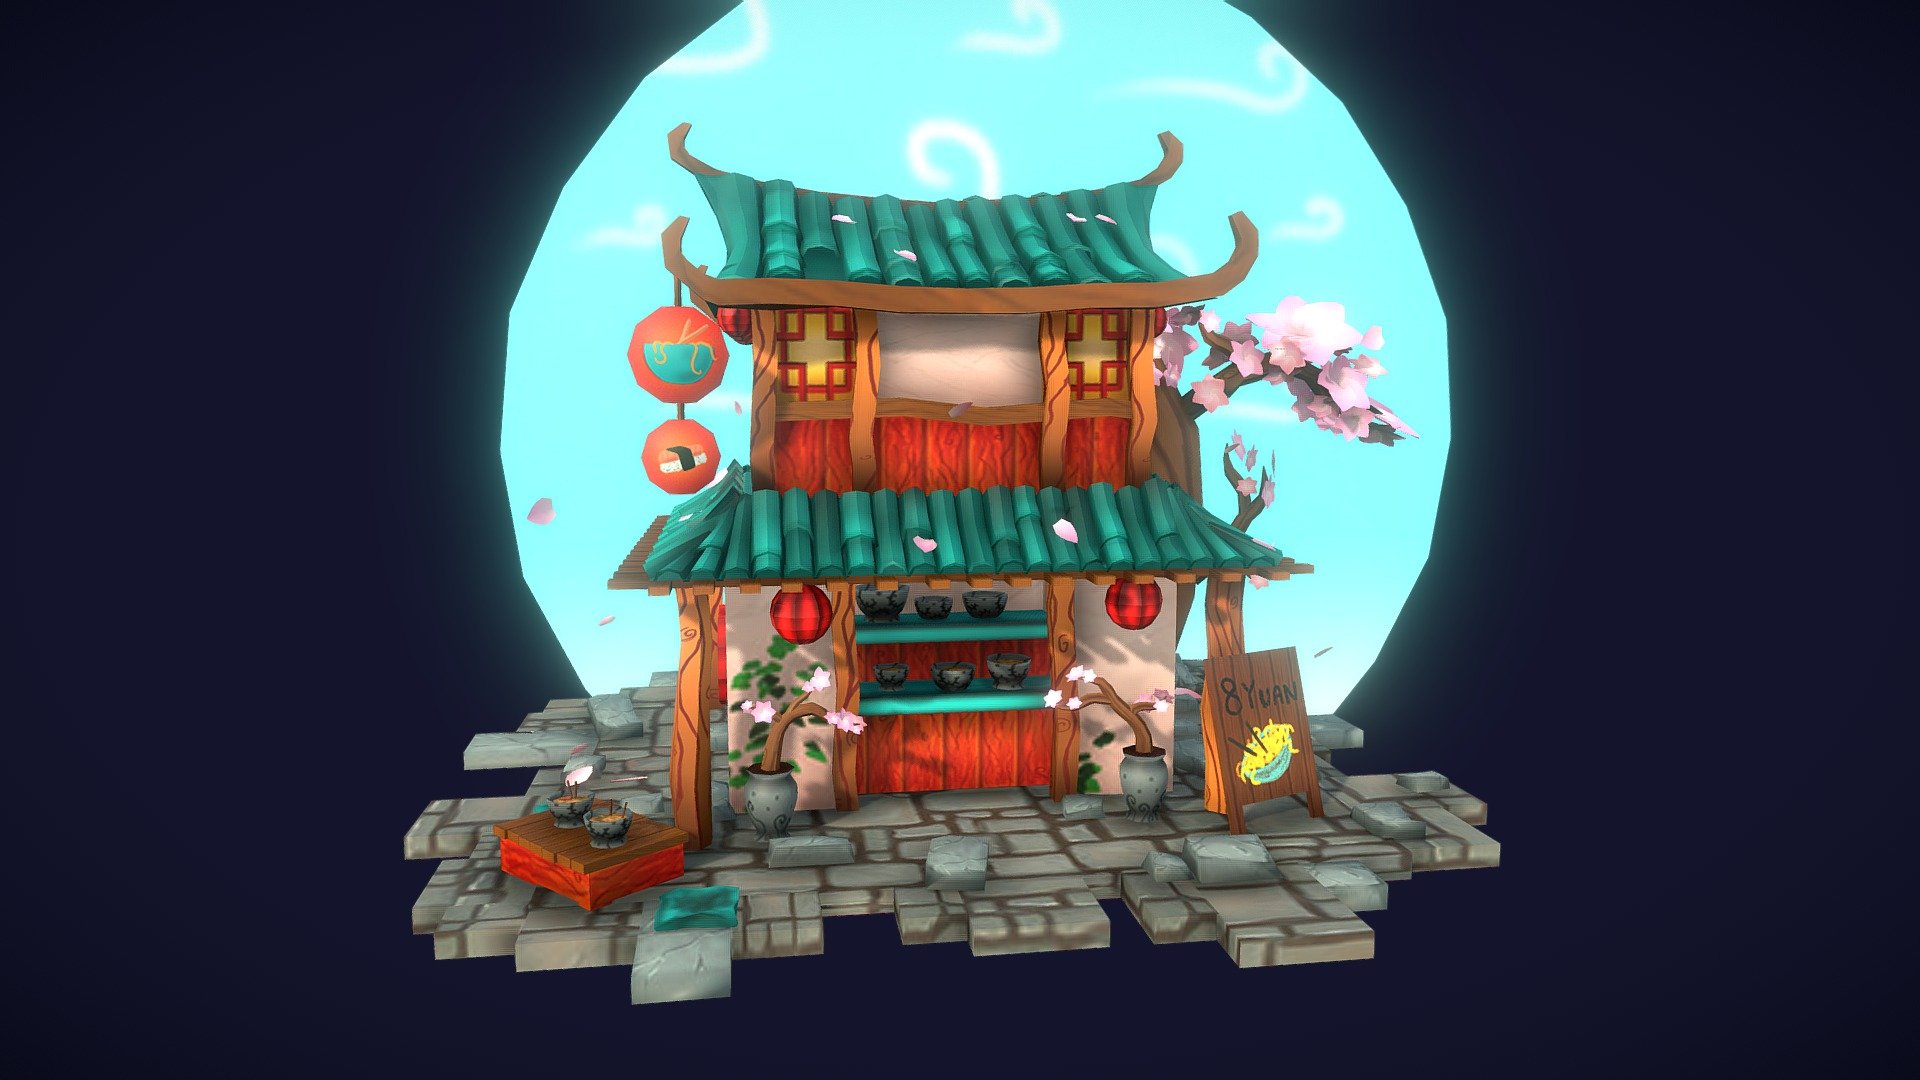 final assignment for Game-Art1 in DAE howest.

an ancient chinese noodle shop modeled in maya and hand textured in photoshop in the style of Albion online! - chinese noodle shop - 3D model by SaraTremerie 3d model